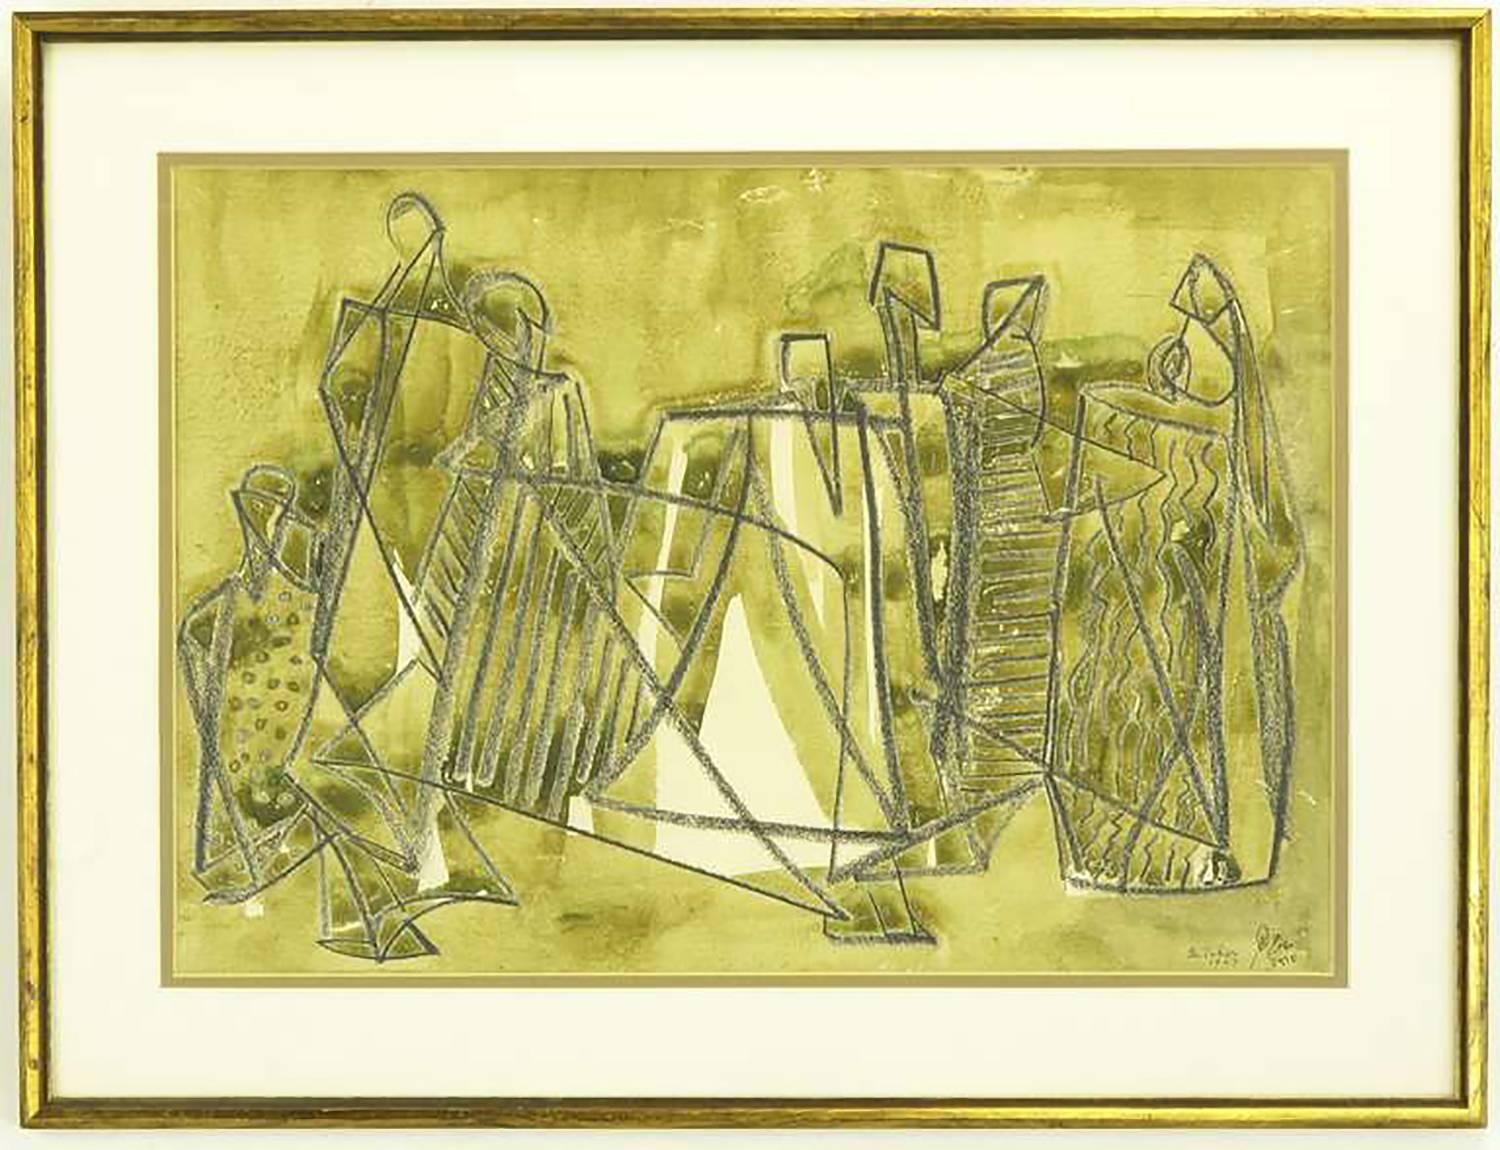 Framed water color by famed Egyptian painter Salah Taher (1911-2007). Salah Taher (Arabic: صلاح طاهر‎) was a prominent Egyptian painter. Born on May 12, 1911, in Cairo, he joined and graduated from Faculty of Fine Arts, now part of Helwan